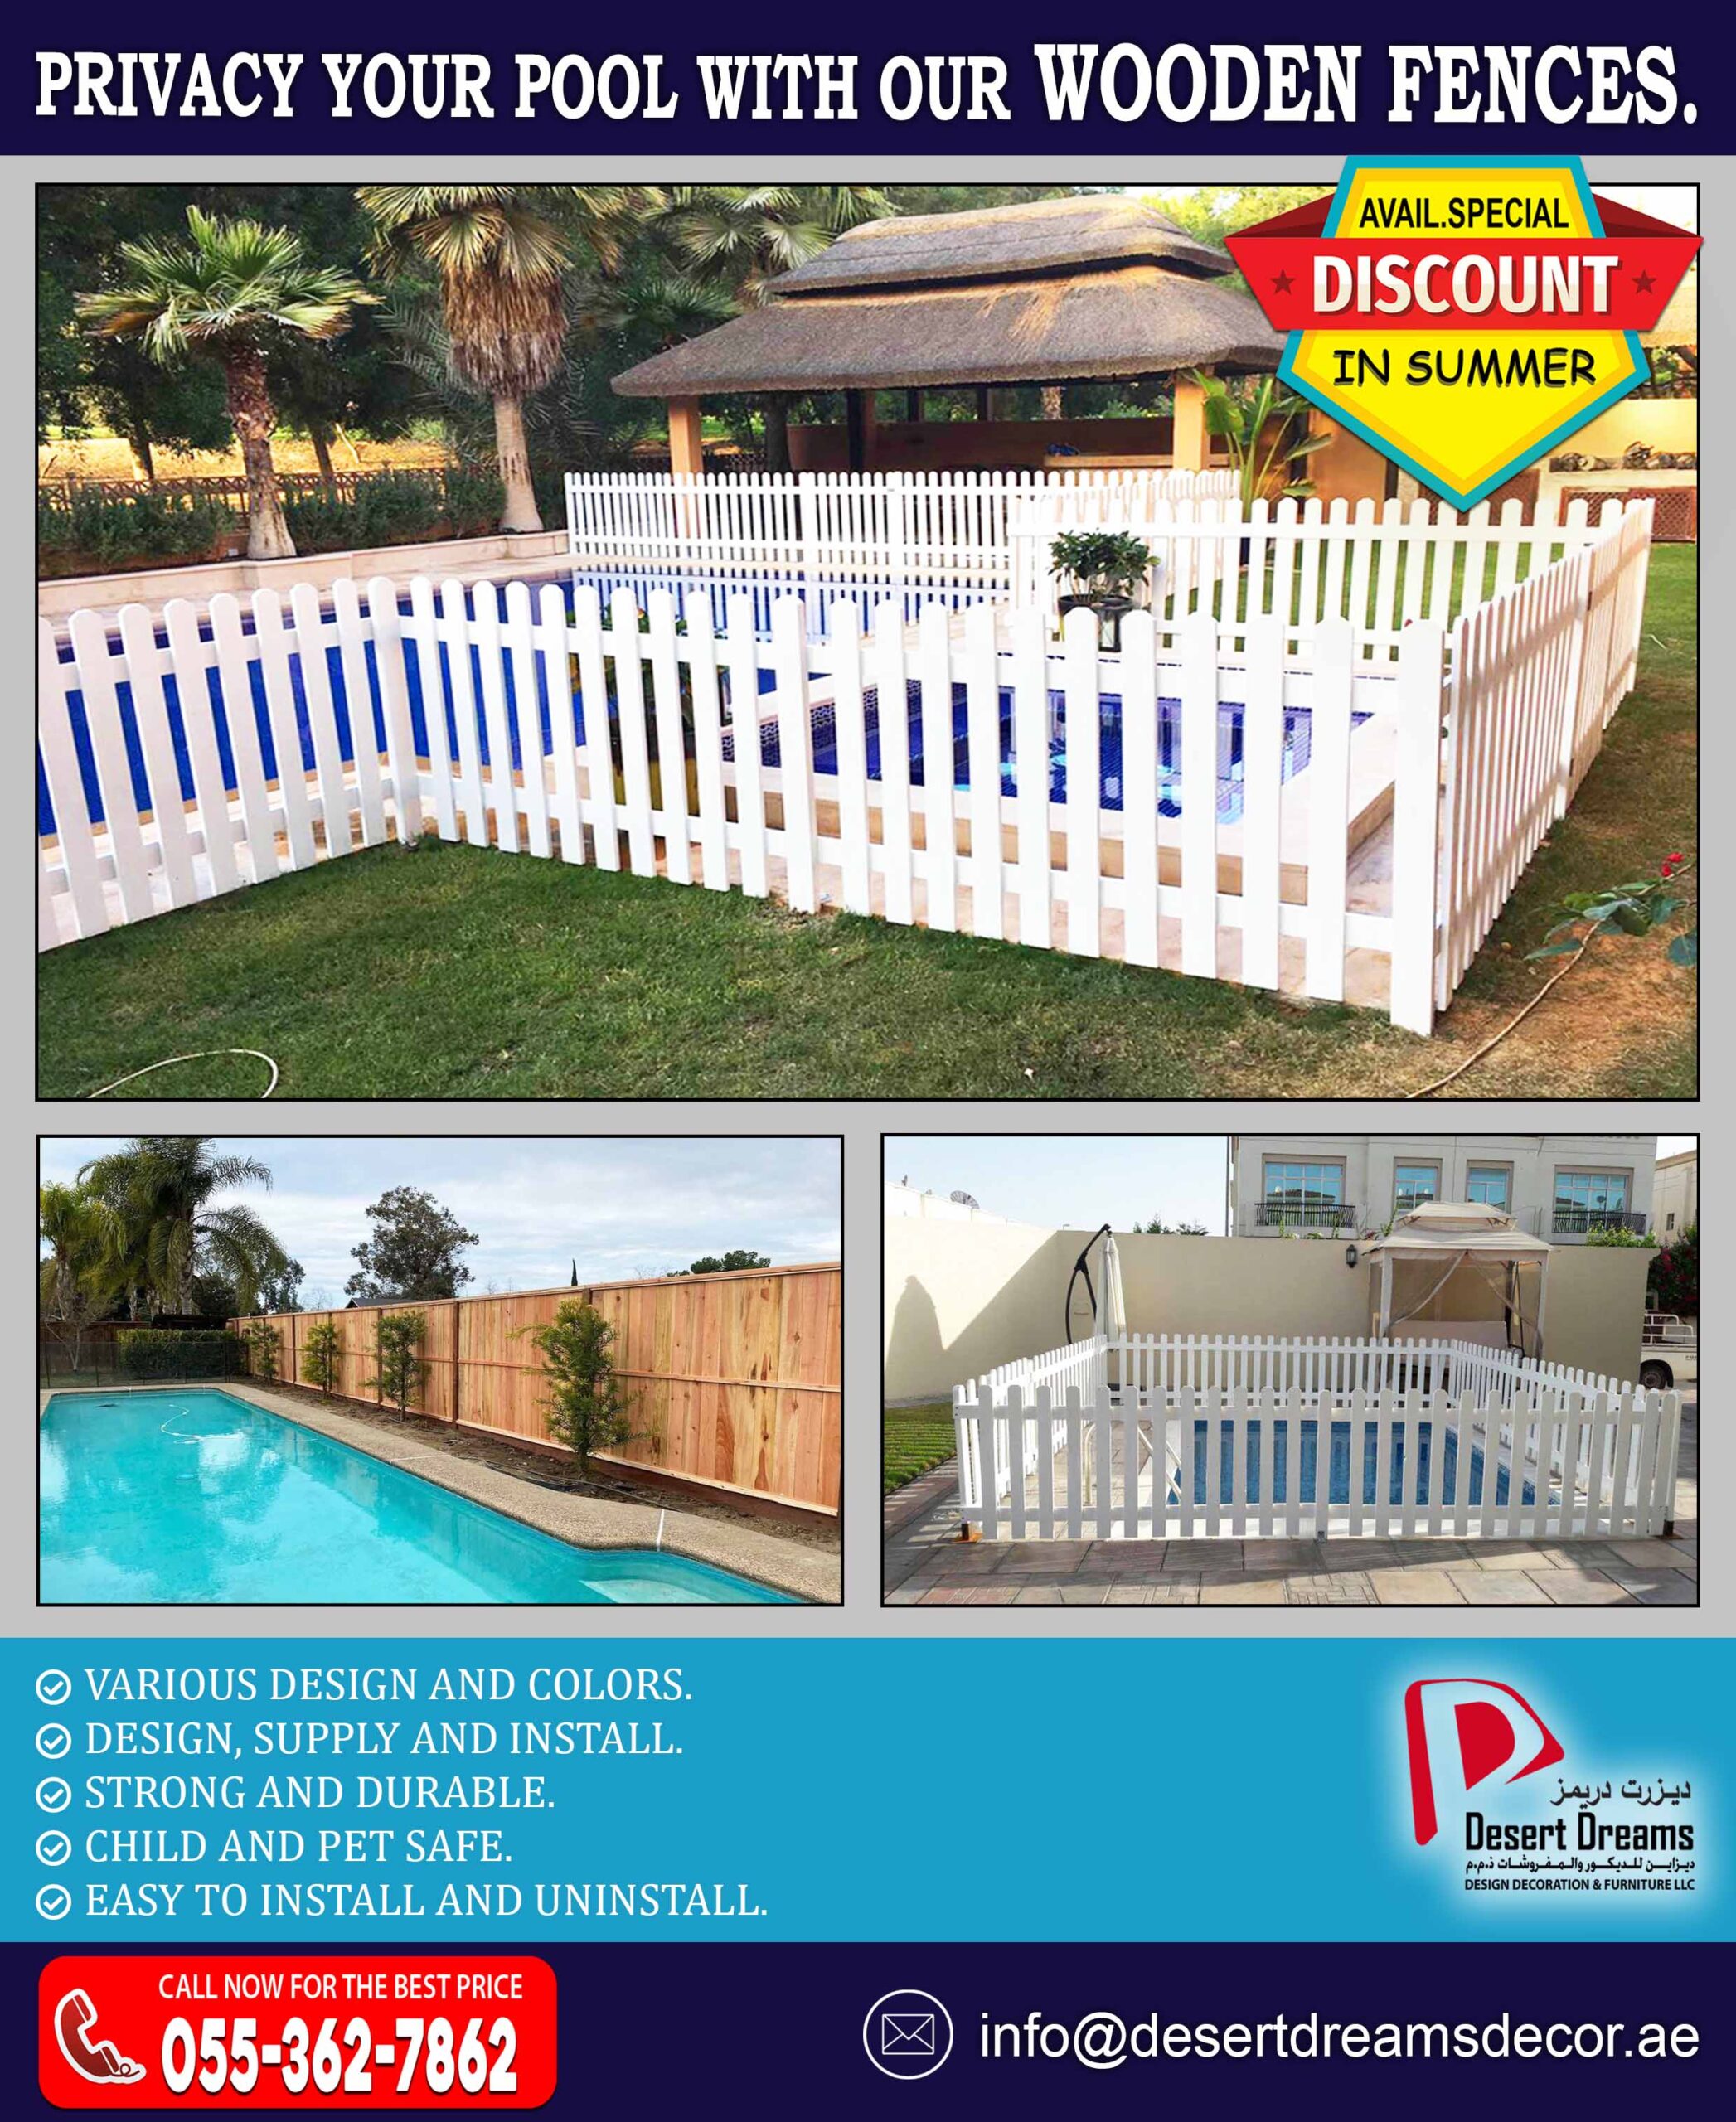 Swimming Pool Privacy Wooden Fences in Uae.jpg